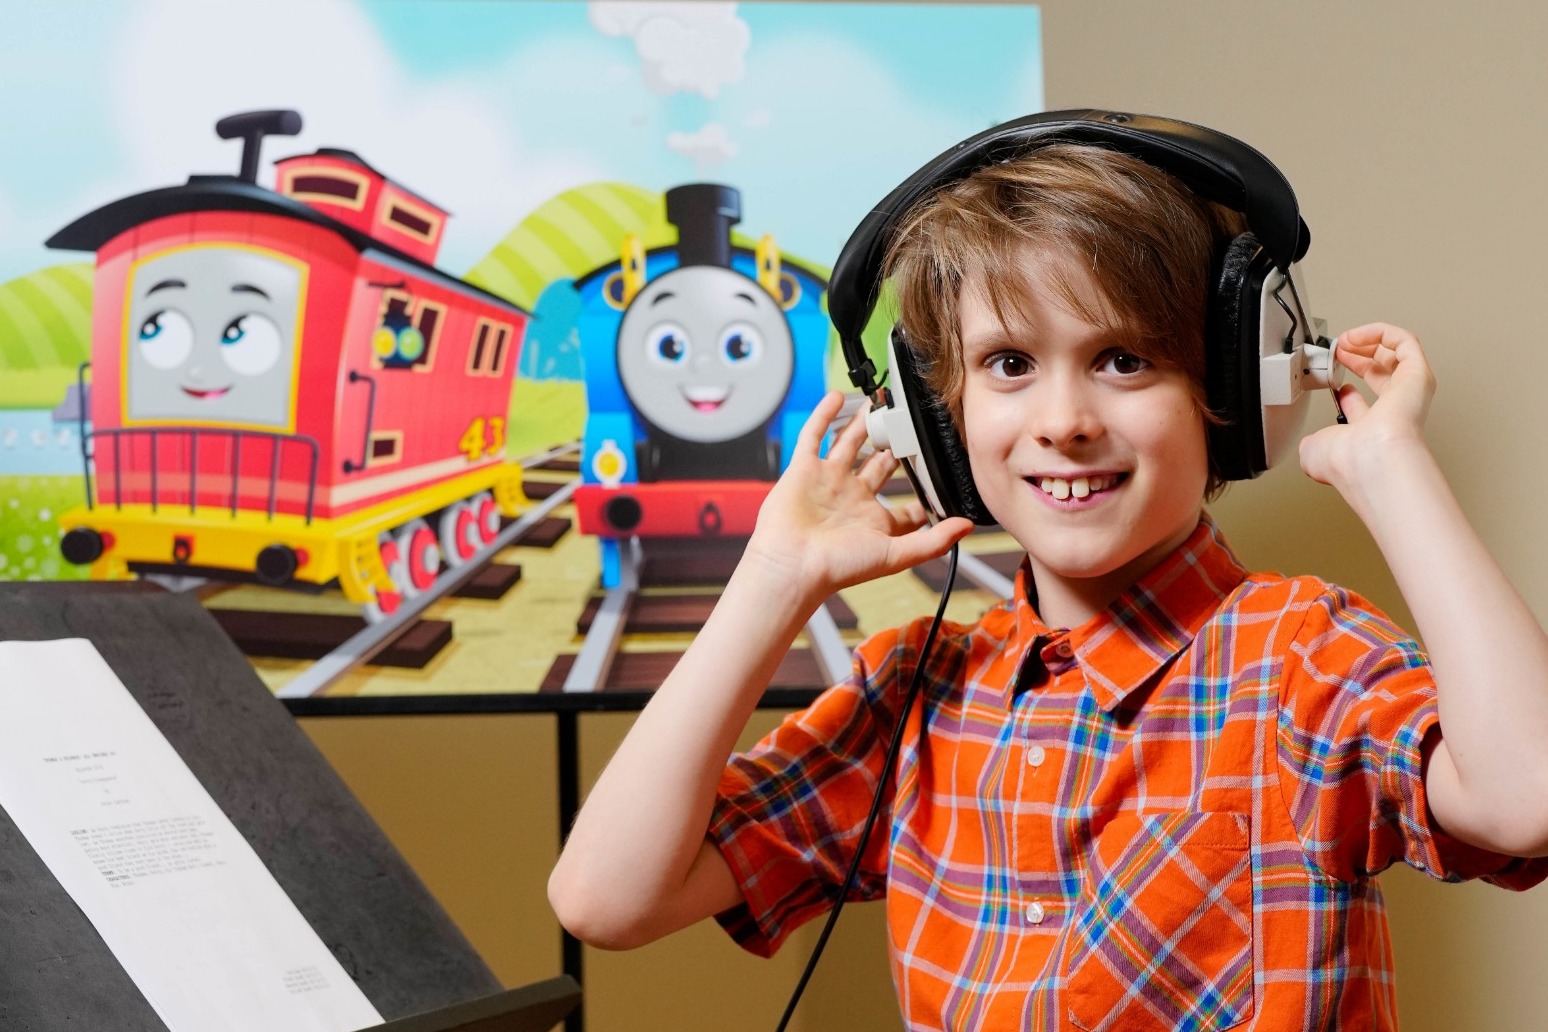 Thomas & Friends to introduce first autistic character Bruno the Brake Car 